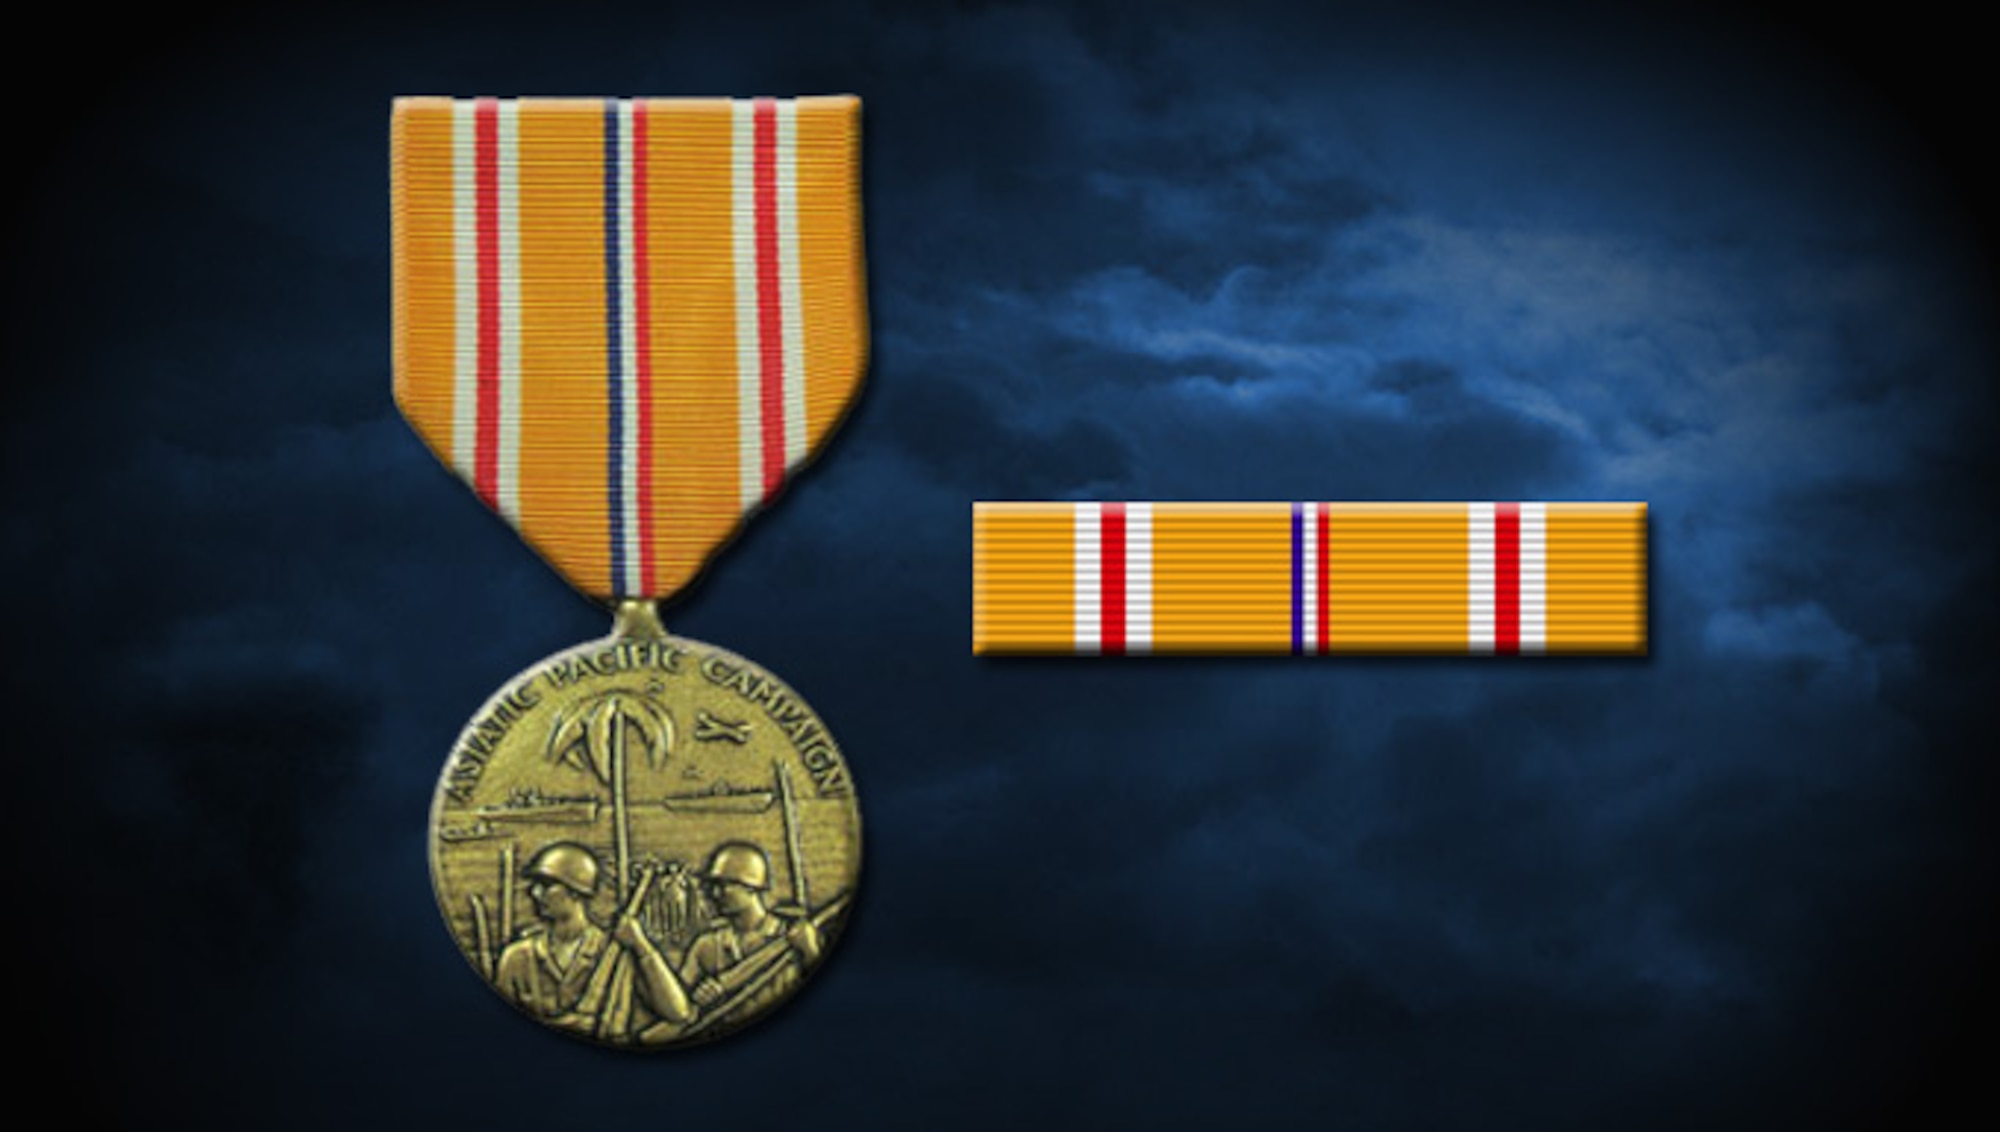 Asiatic Pacific Campaign Medal Air